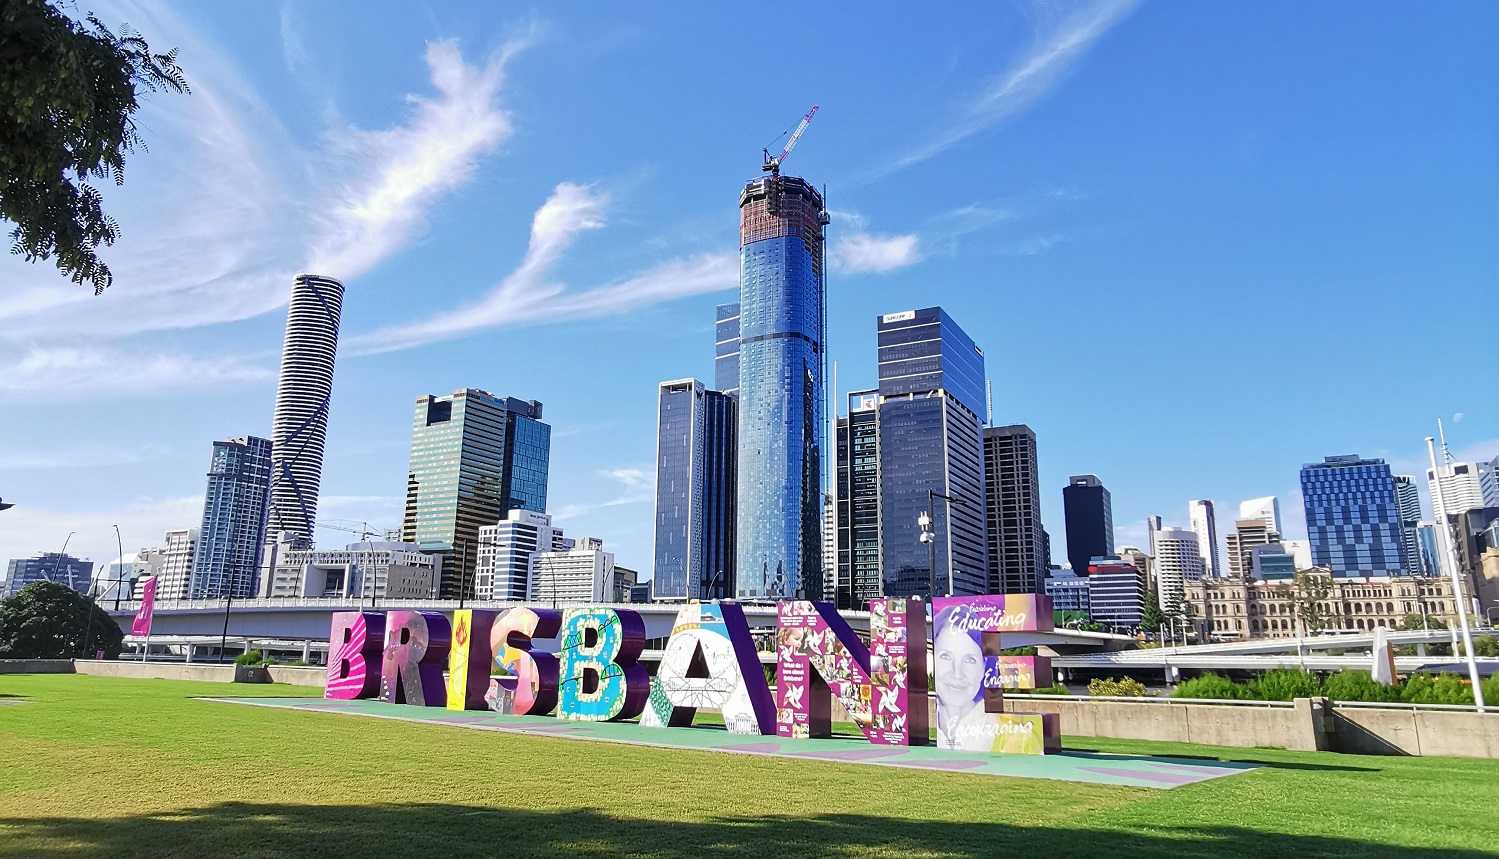 Brisbane sign at South Bank Parklands, a popular photo spot with the city skyline in the background